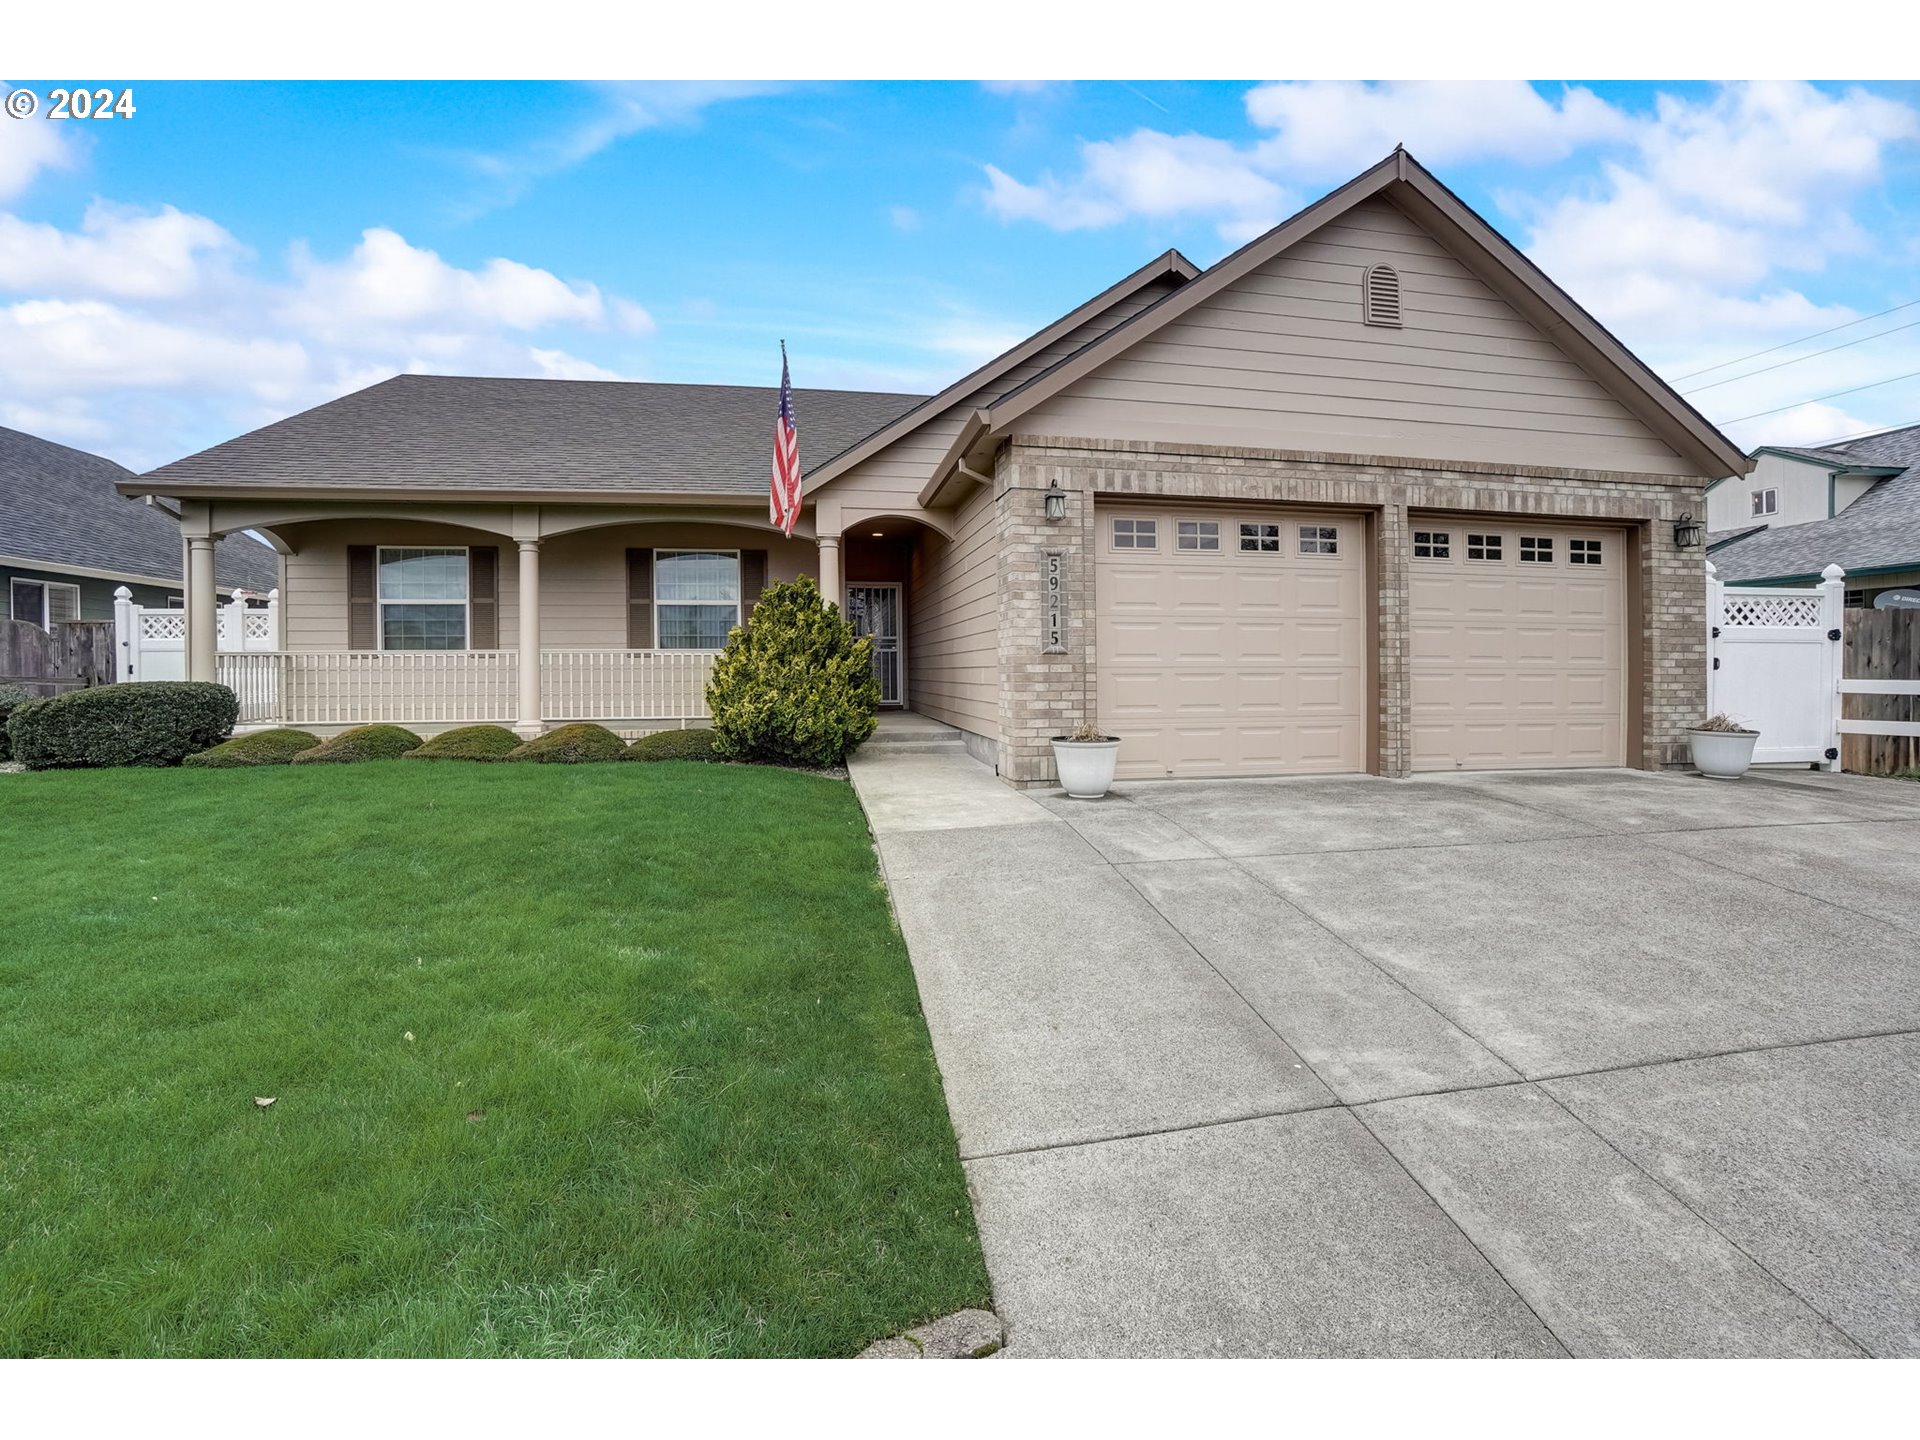 59215 WHITETAIL AVE, St. Helens, OR 